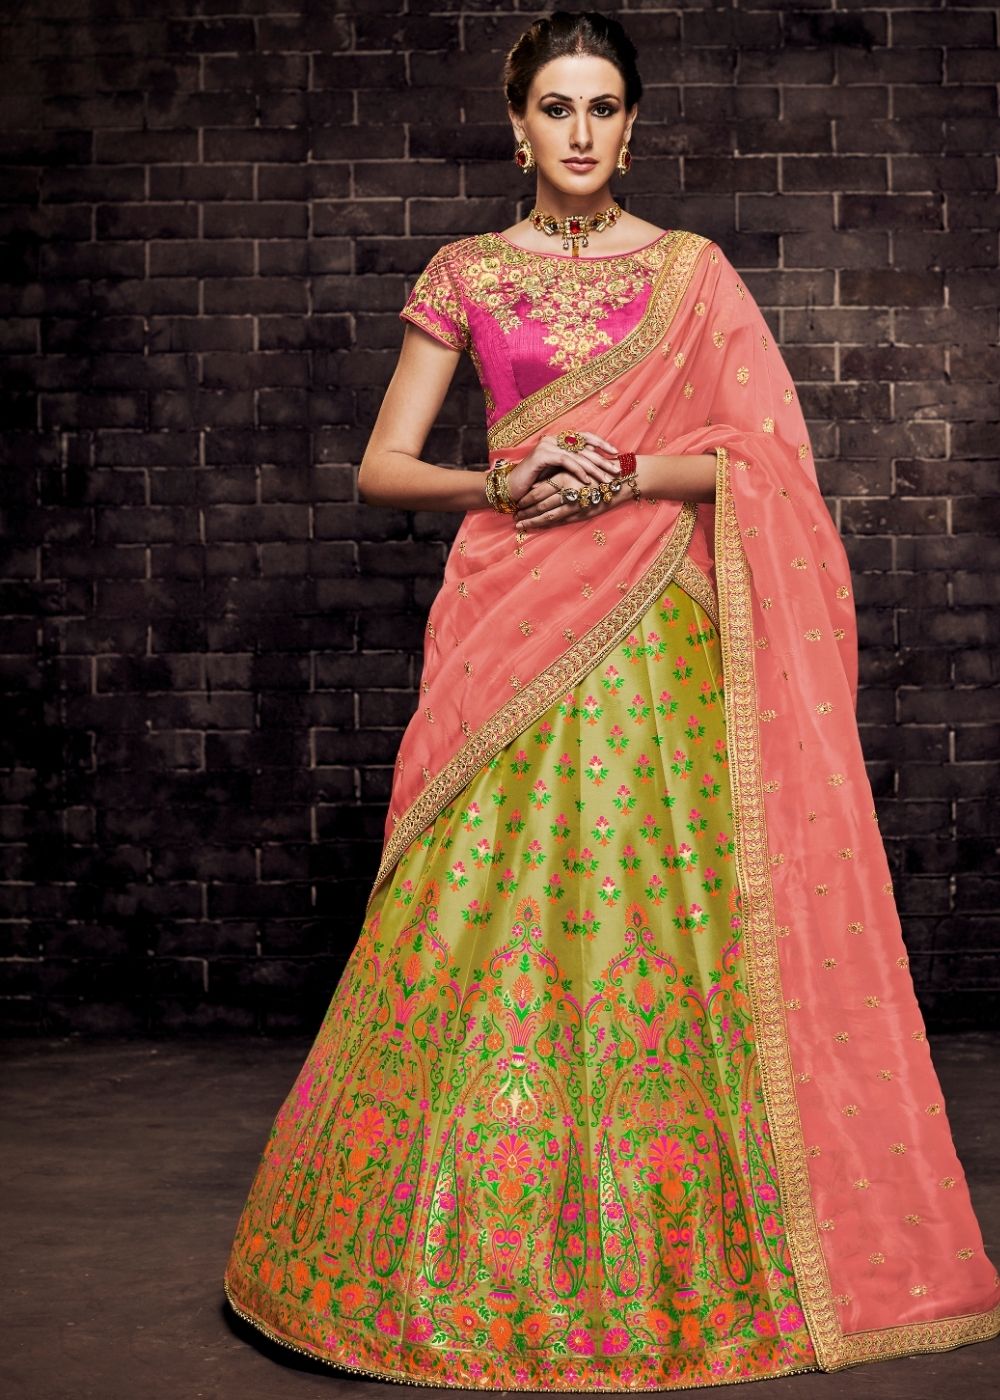 Sitting pretty in this @pooja77rajpaljaggi lehenga. The combination of the  rani pink and parrot green makes it perfect for the festive season. Don't  you think?